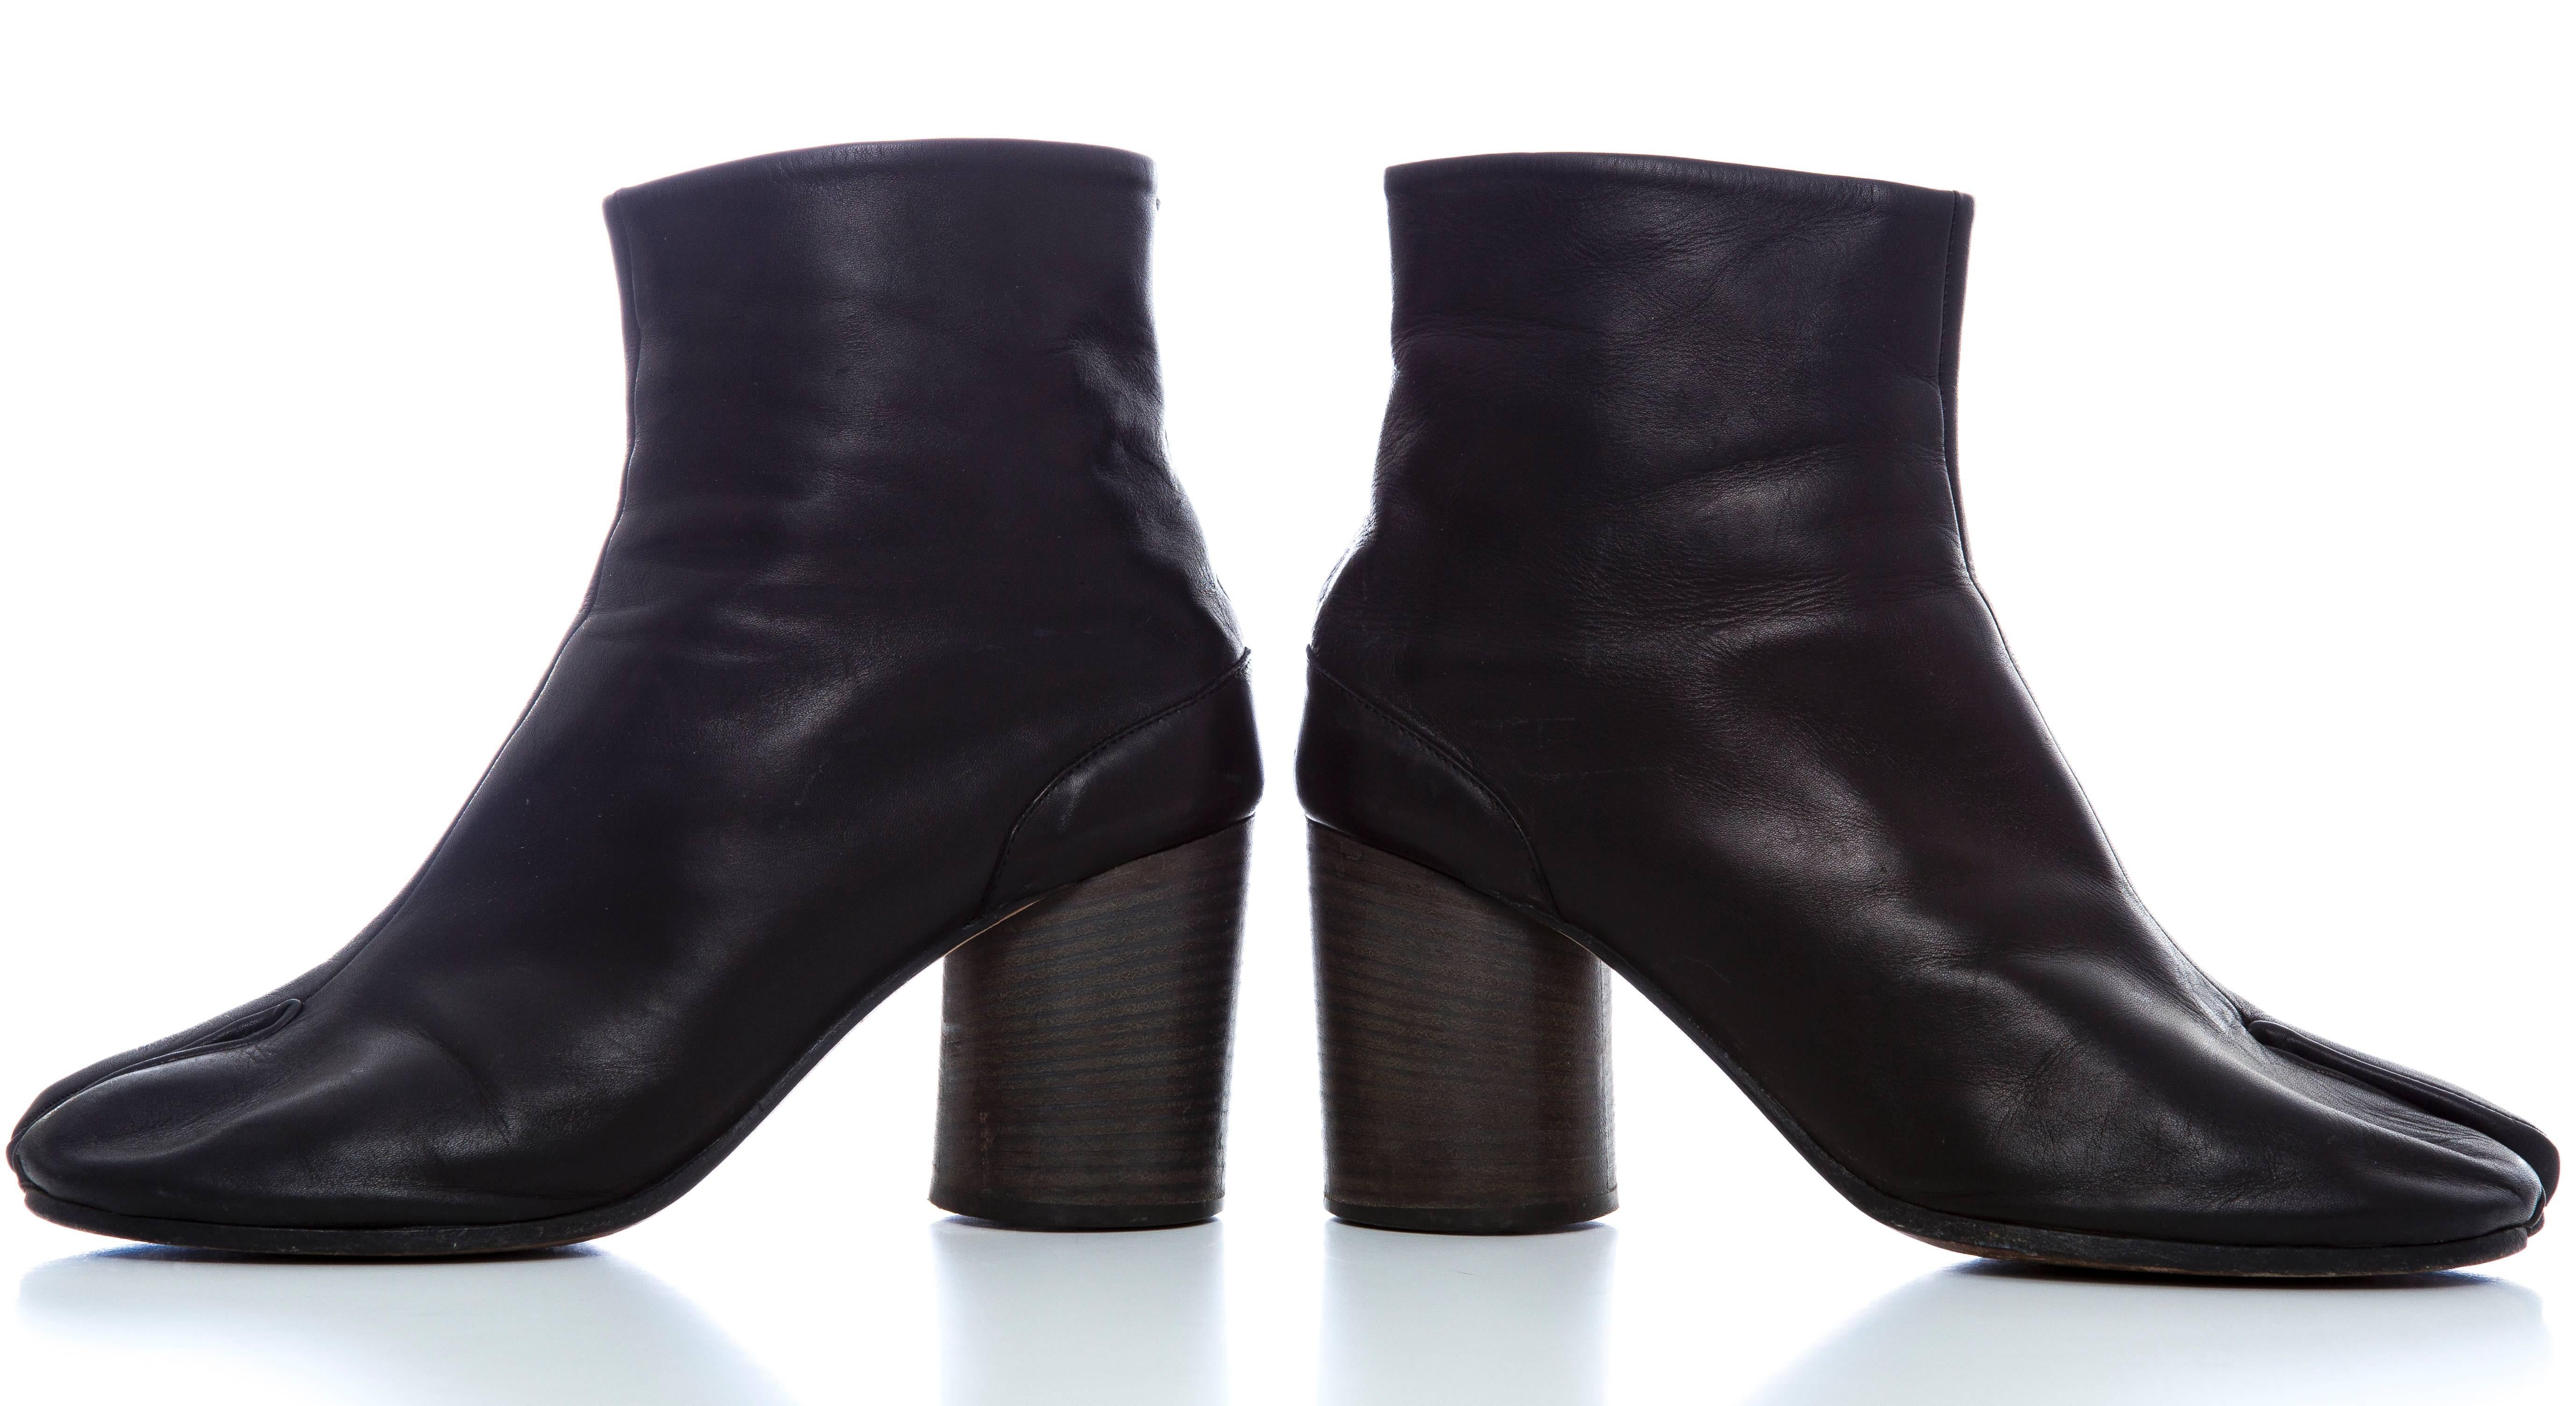 Maison Martin Margiela black leather Tabi ankle boots with tonal stitching, stacked heels and hook closures at backs.

EU. 41
US. 11

Heels: 3.25